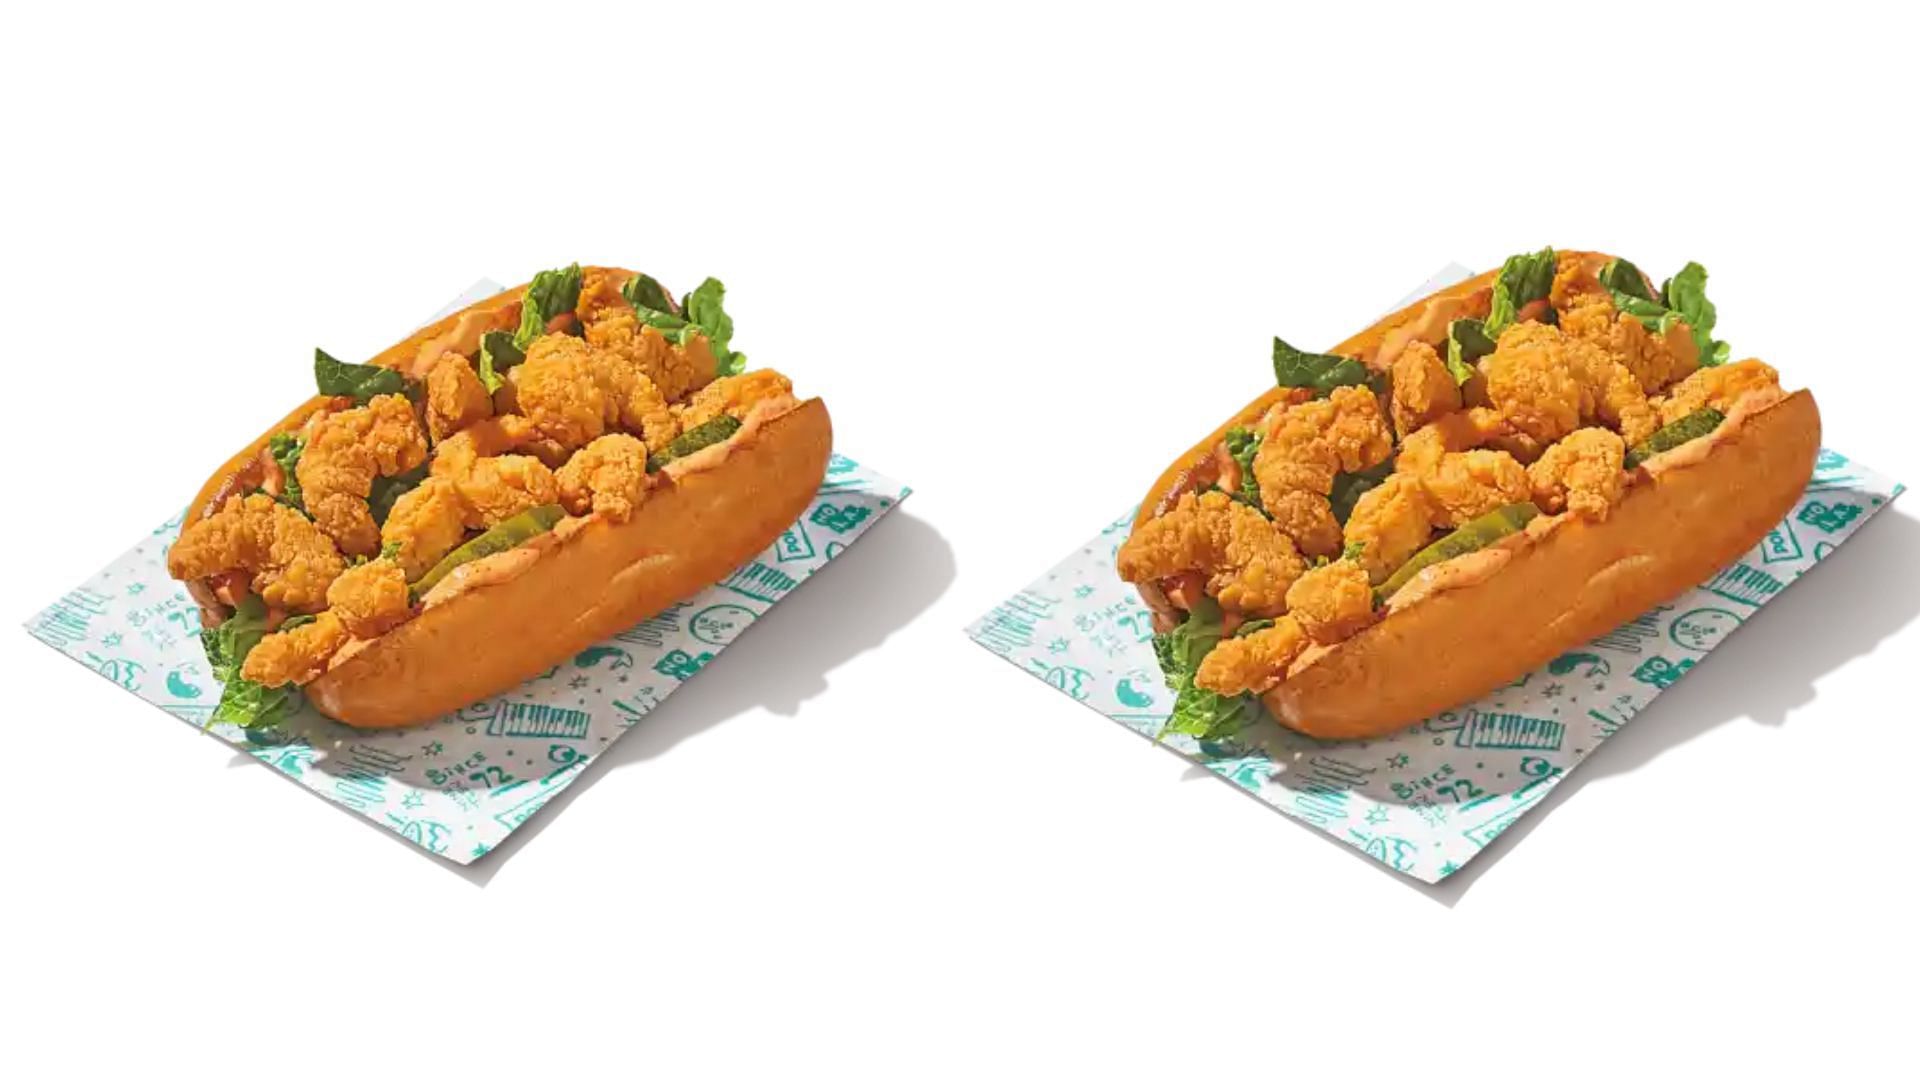 The all-new Shrimp Roll features the chain&#039;s crispy Popcorn Chicken at its heart along with leafy green lettuce, pickles, and blackened tartar sauce (Image via Popeyes)